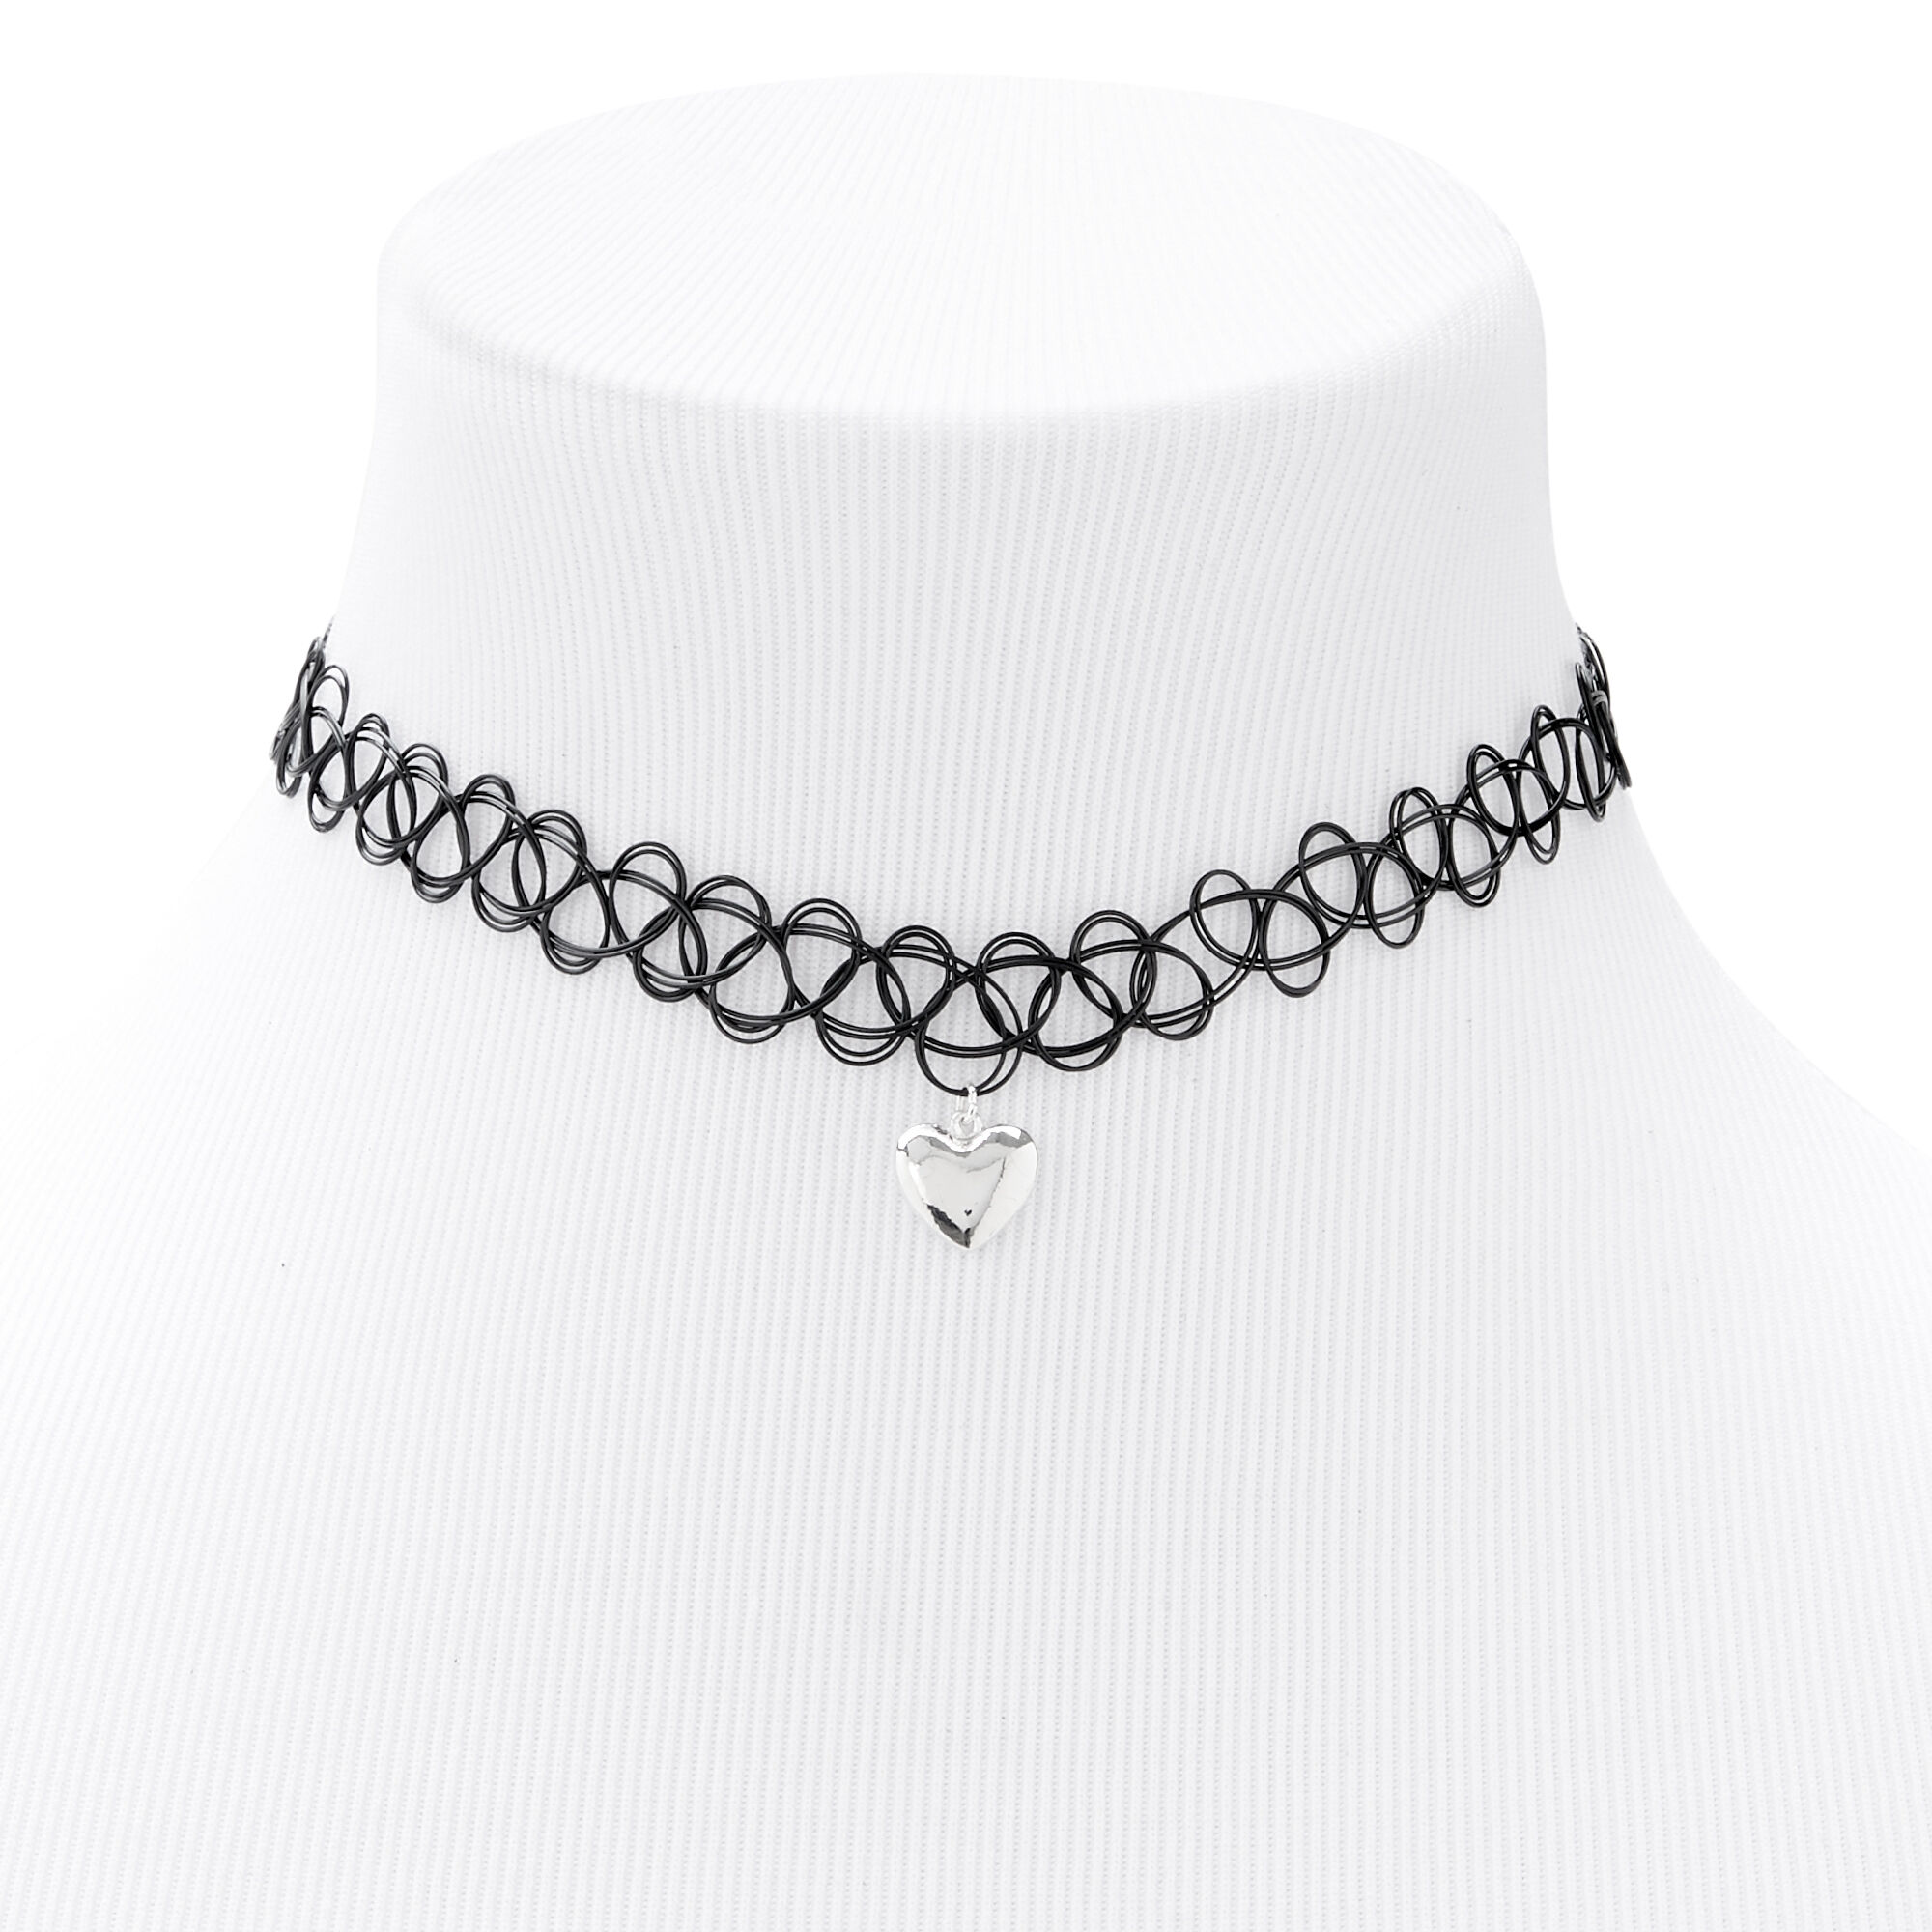 View Claires SilverTone Puffy Heart Tattoo Choker Necklace Black information